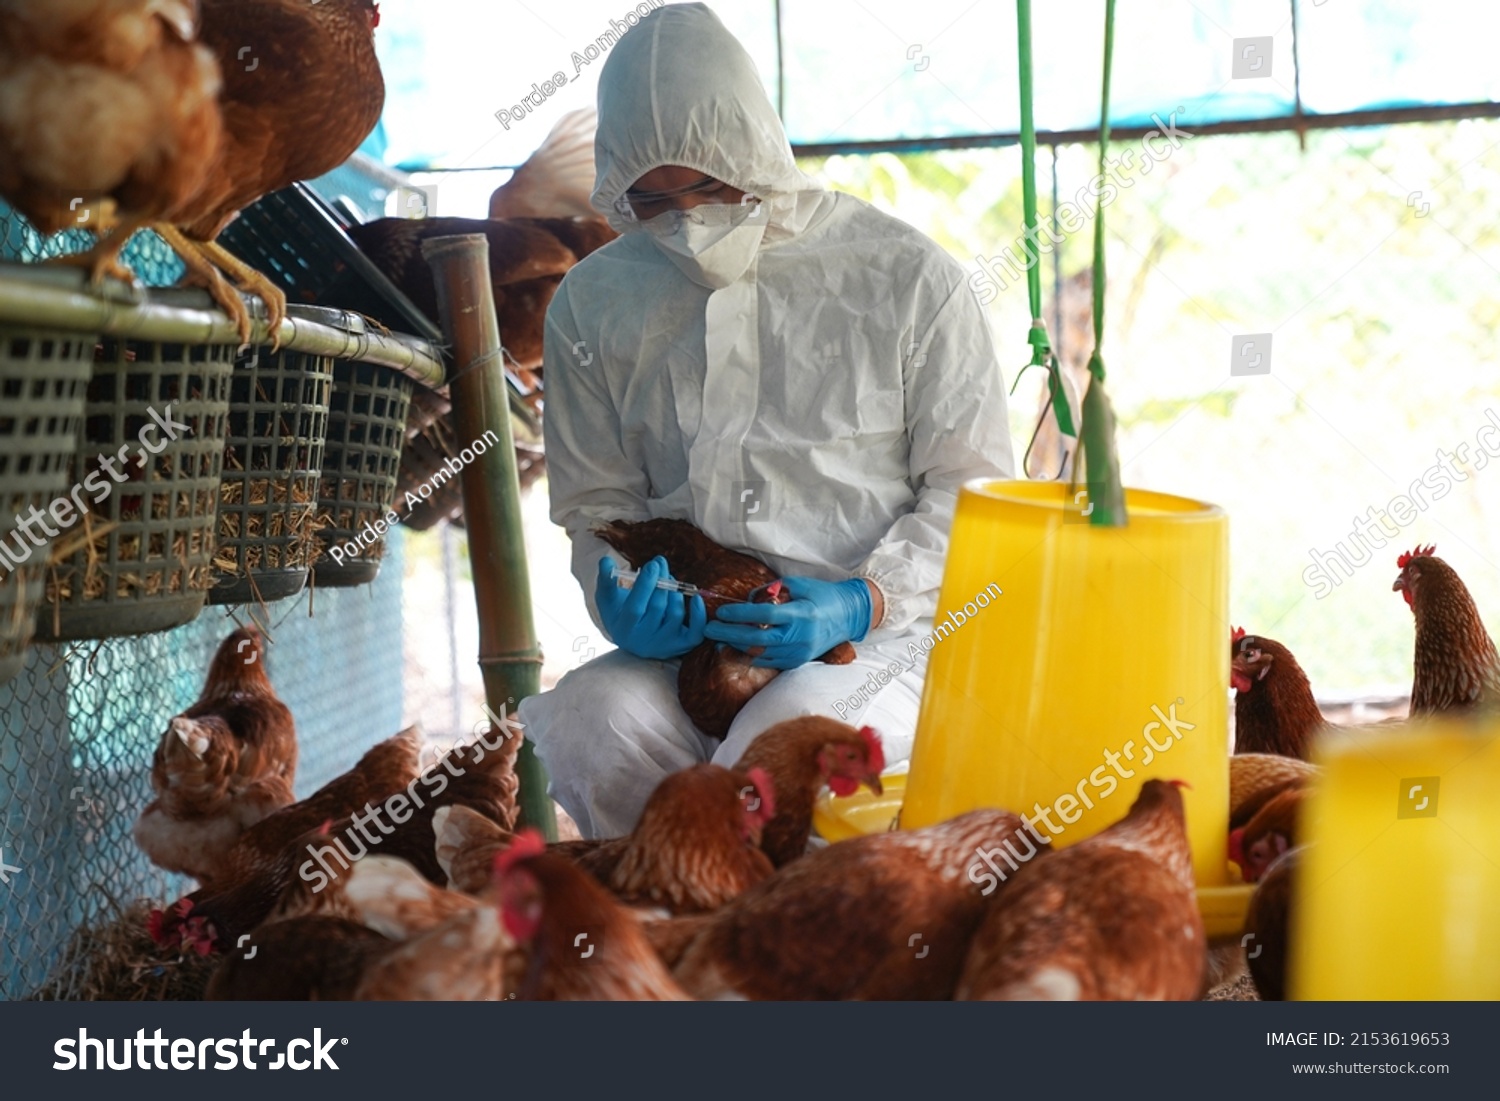 Bird flu, Veterinarians vaccinate against diseases in poultry such as farm chickens, H5N1 H5N6 Avian Influenza (HPAI), which causes severe symptoms and rapid death of infected poultry.
 #2153619653